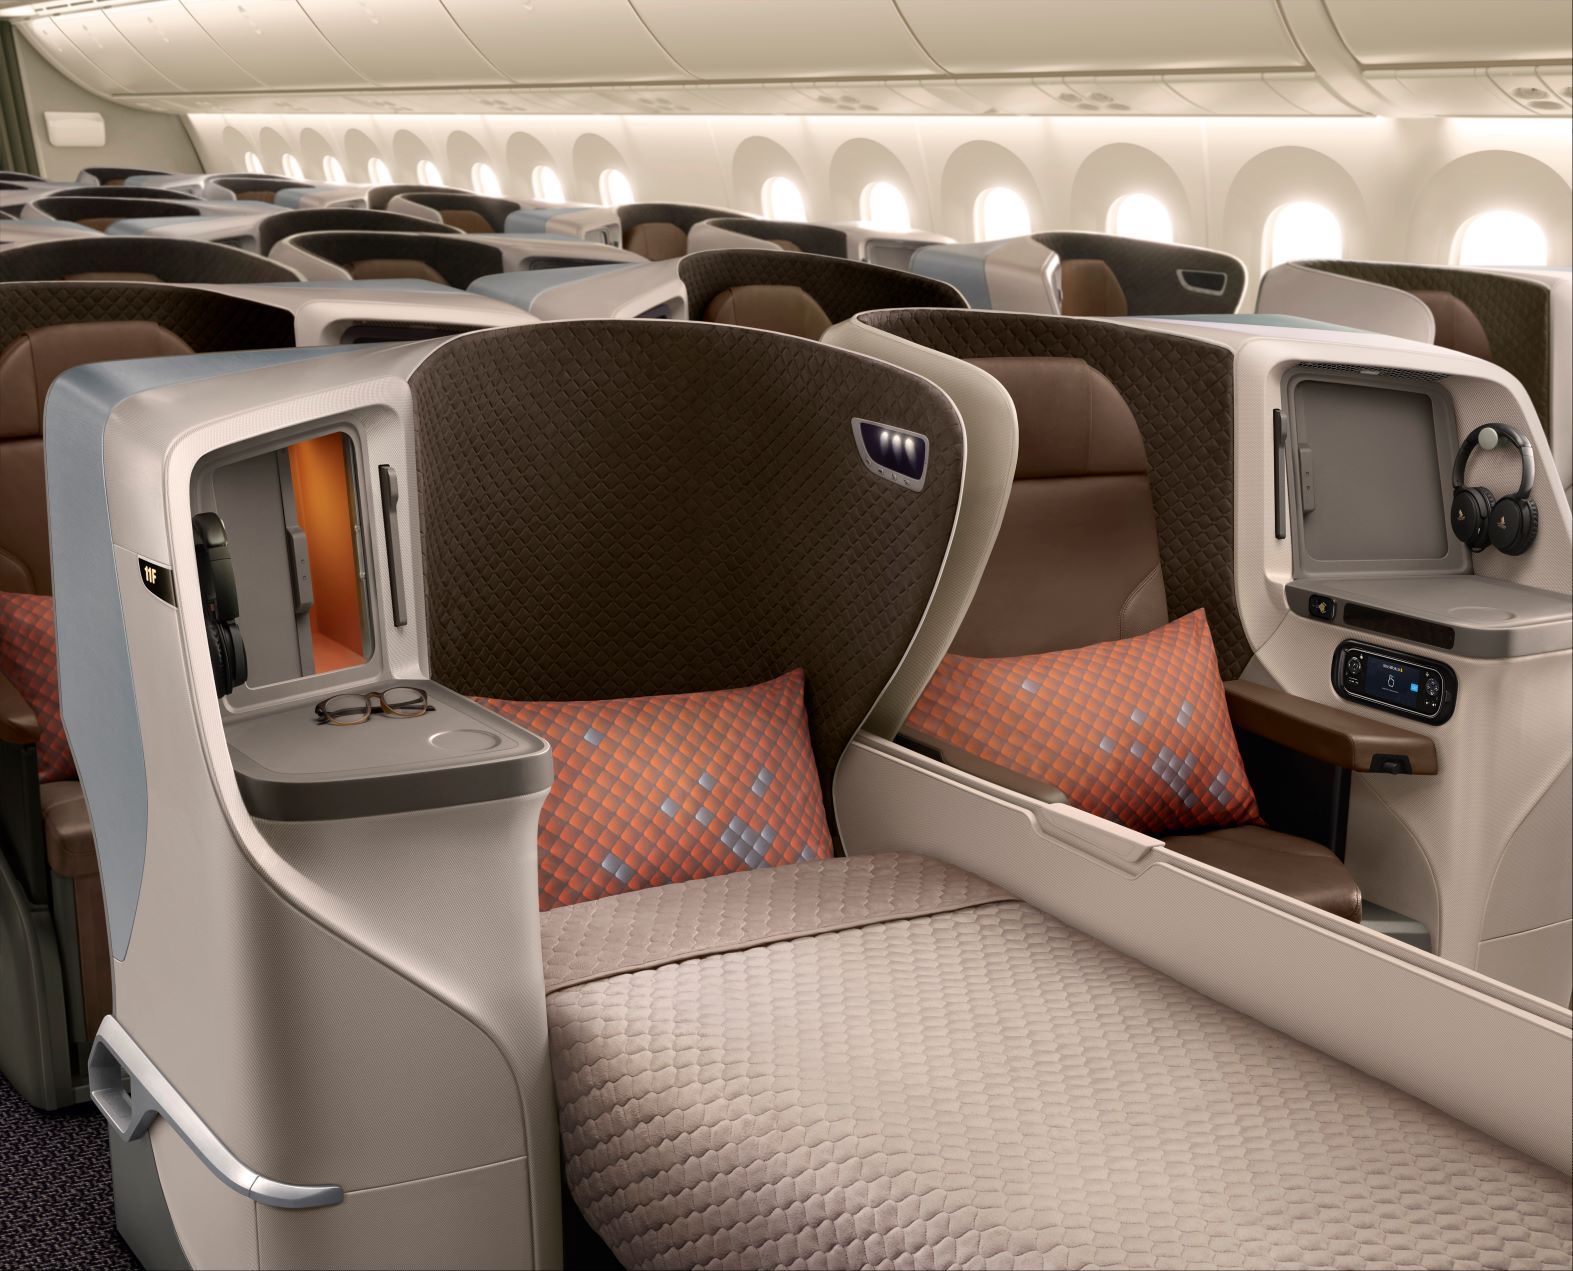 Singapore Airlines A350 Regional Business Class